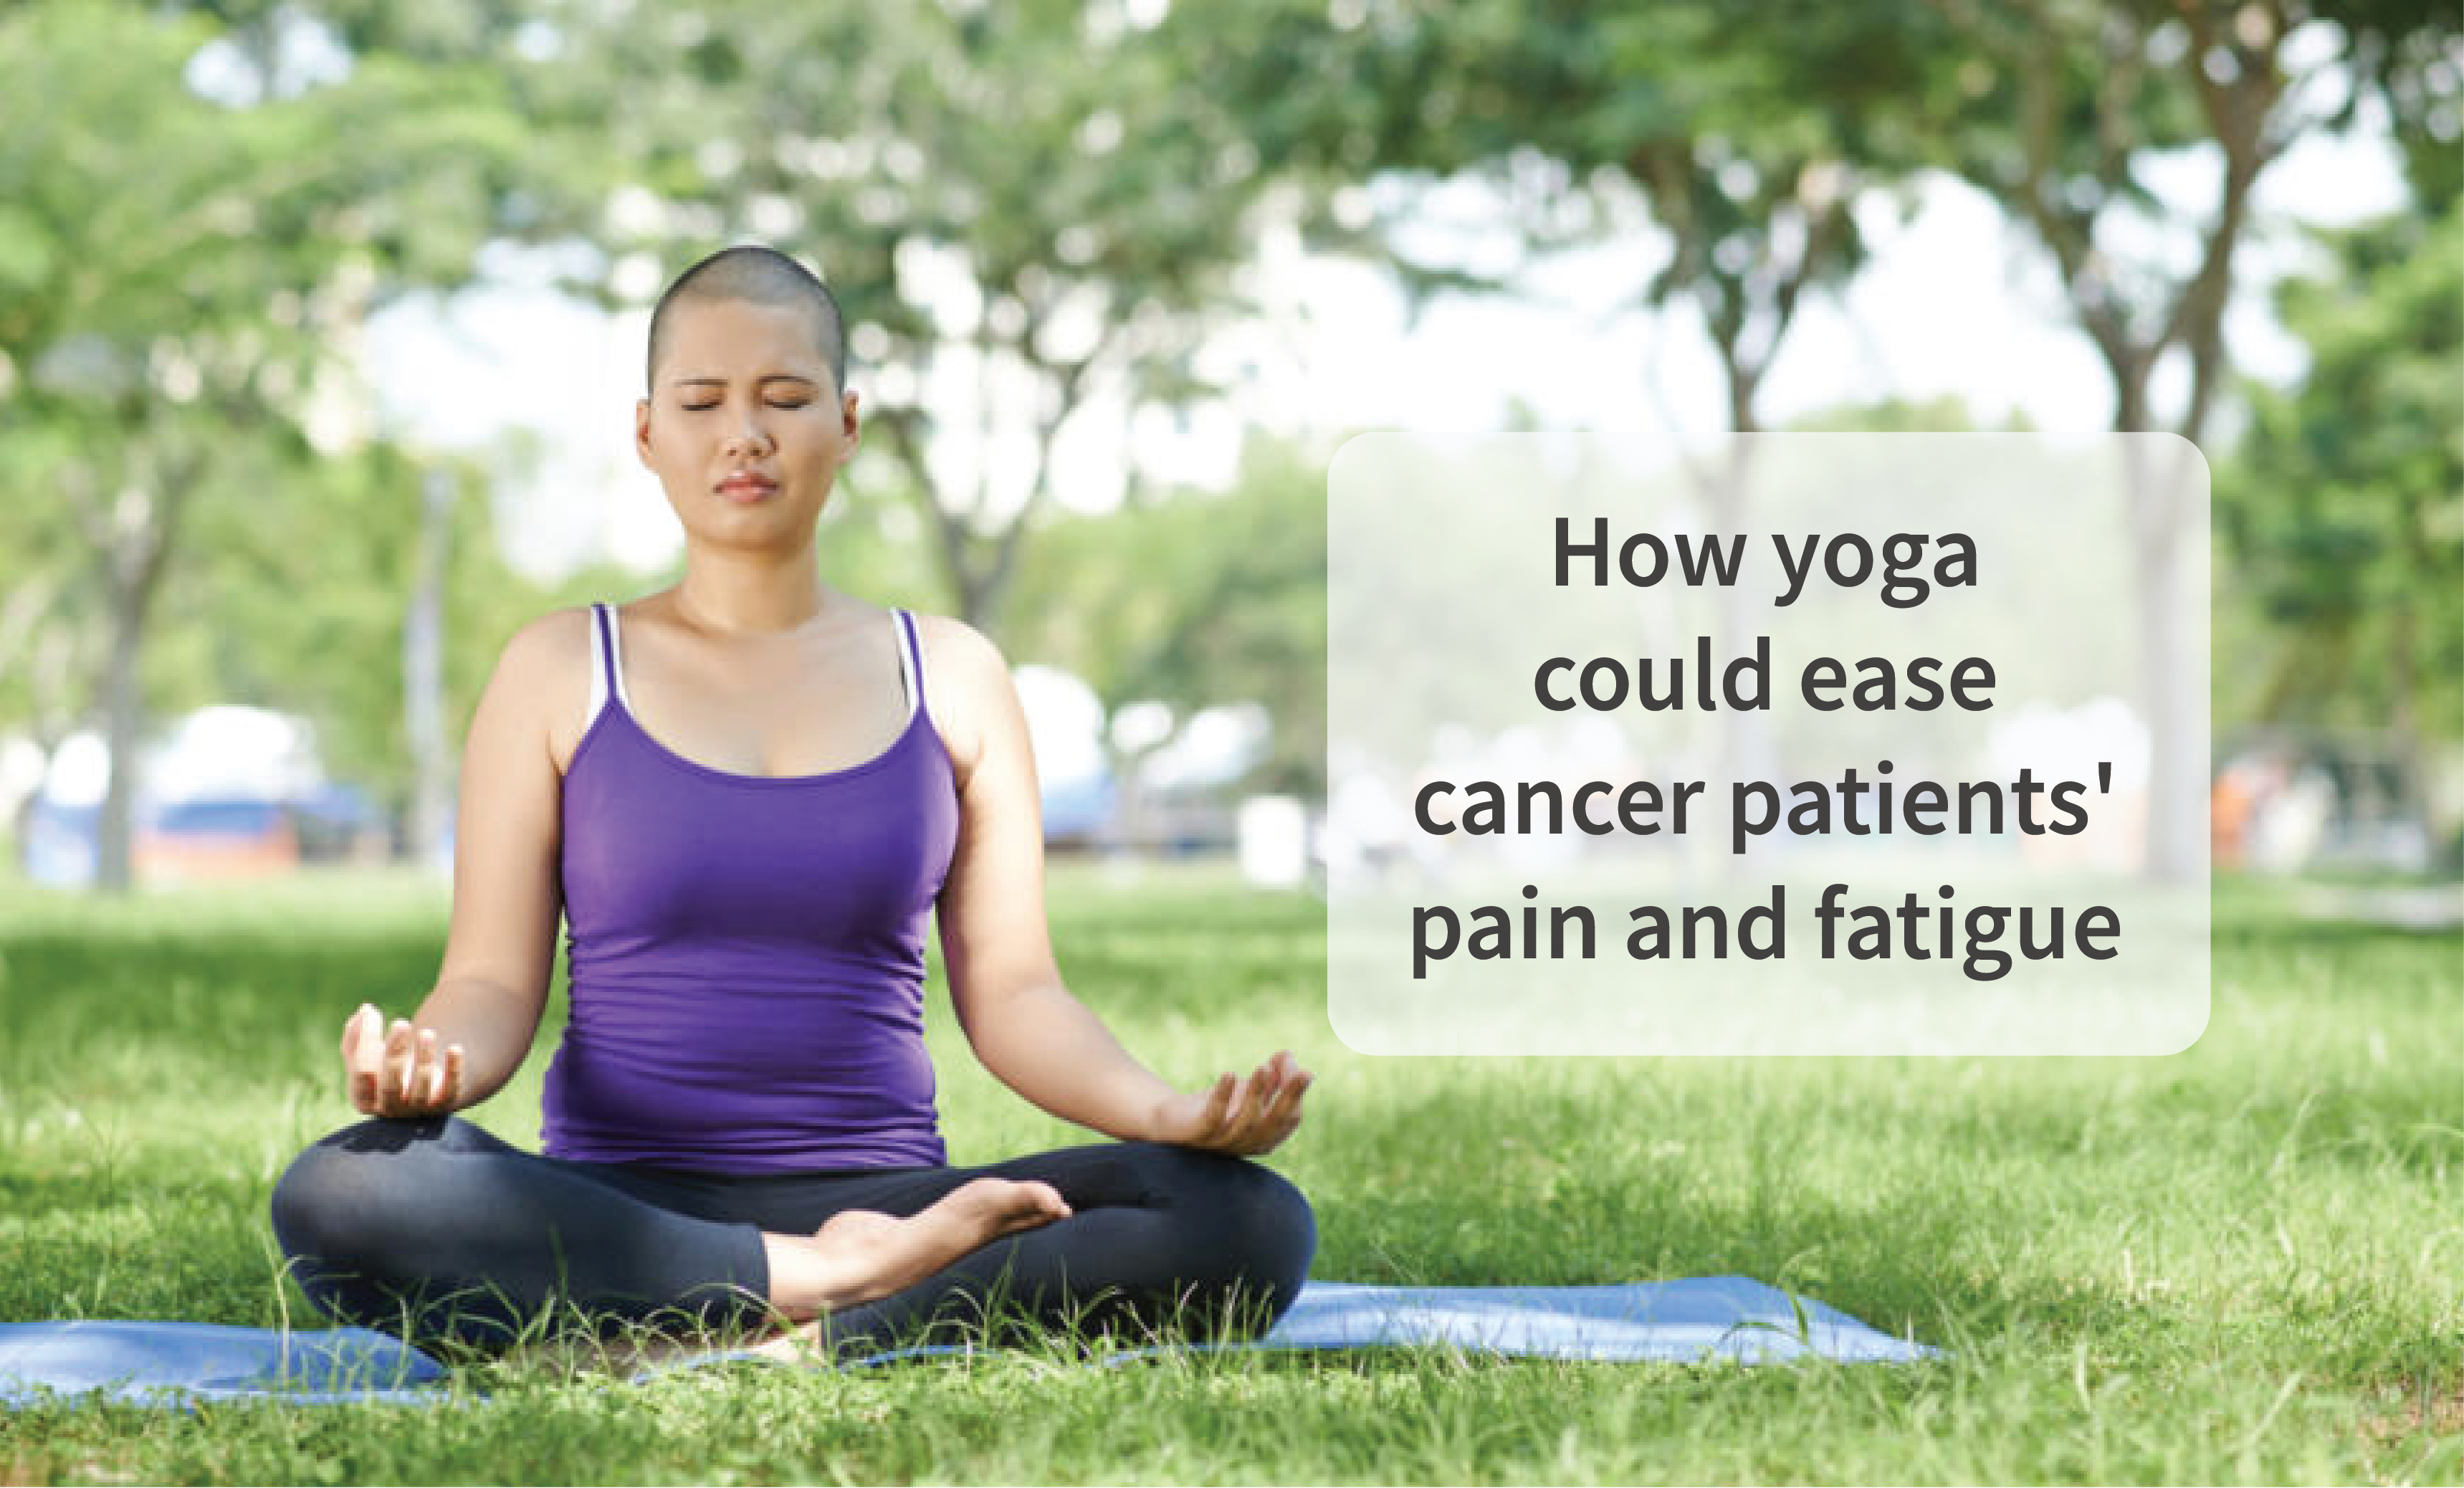 How yoga could ease cancer patients' pain and fatigue